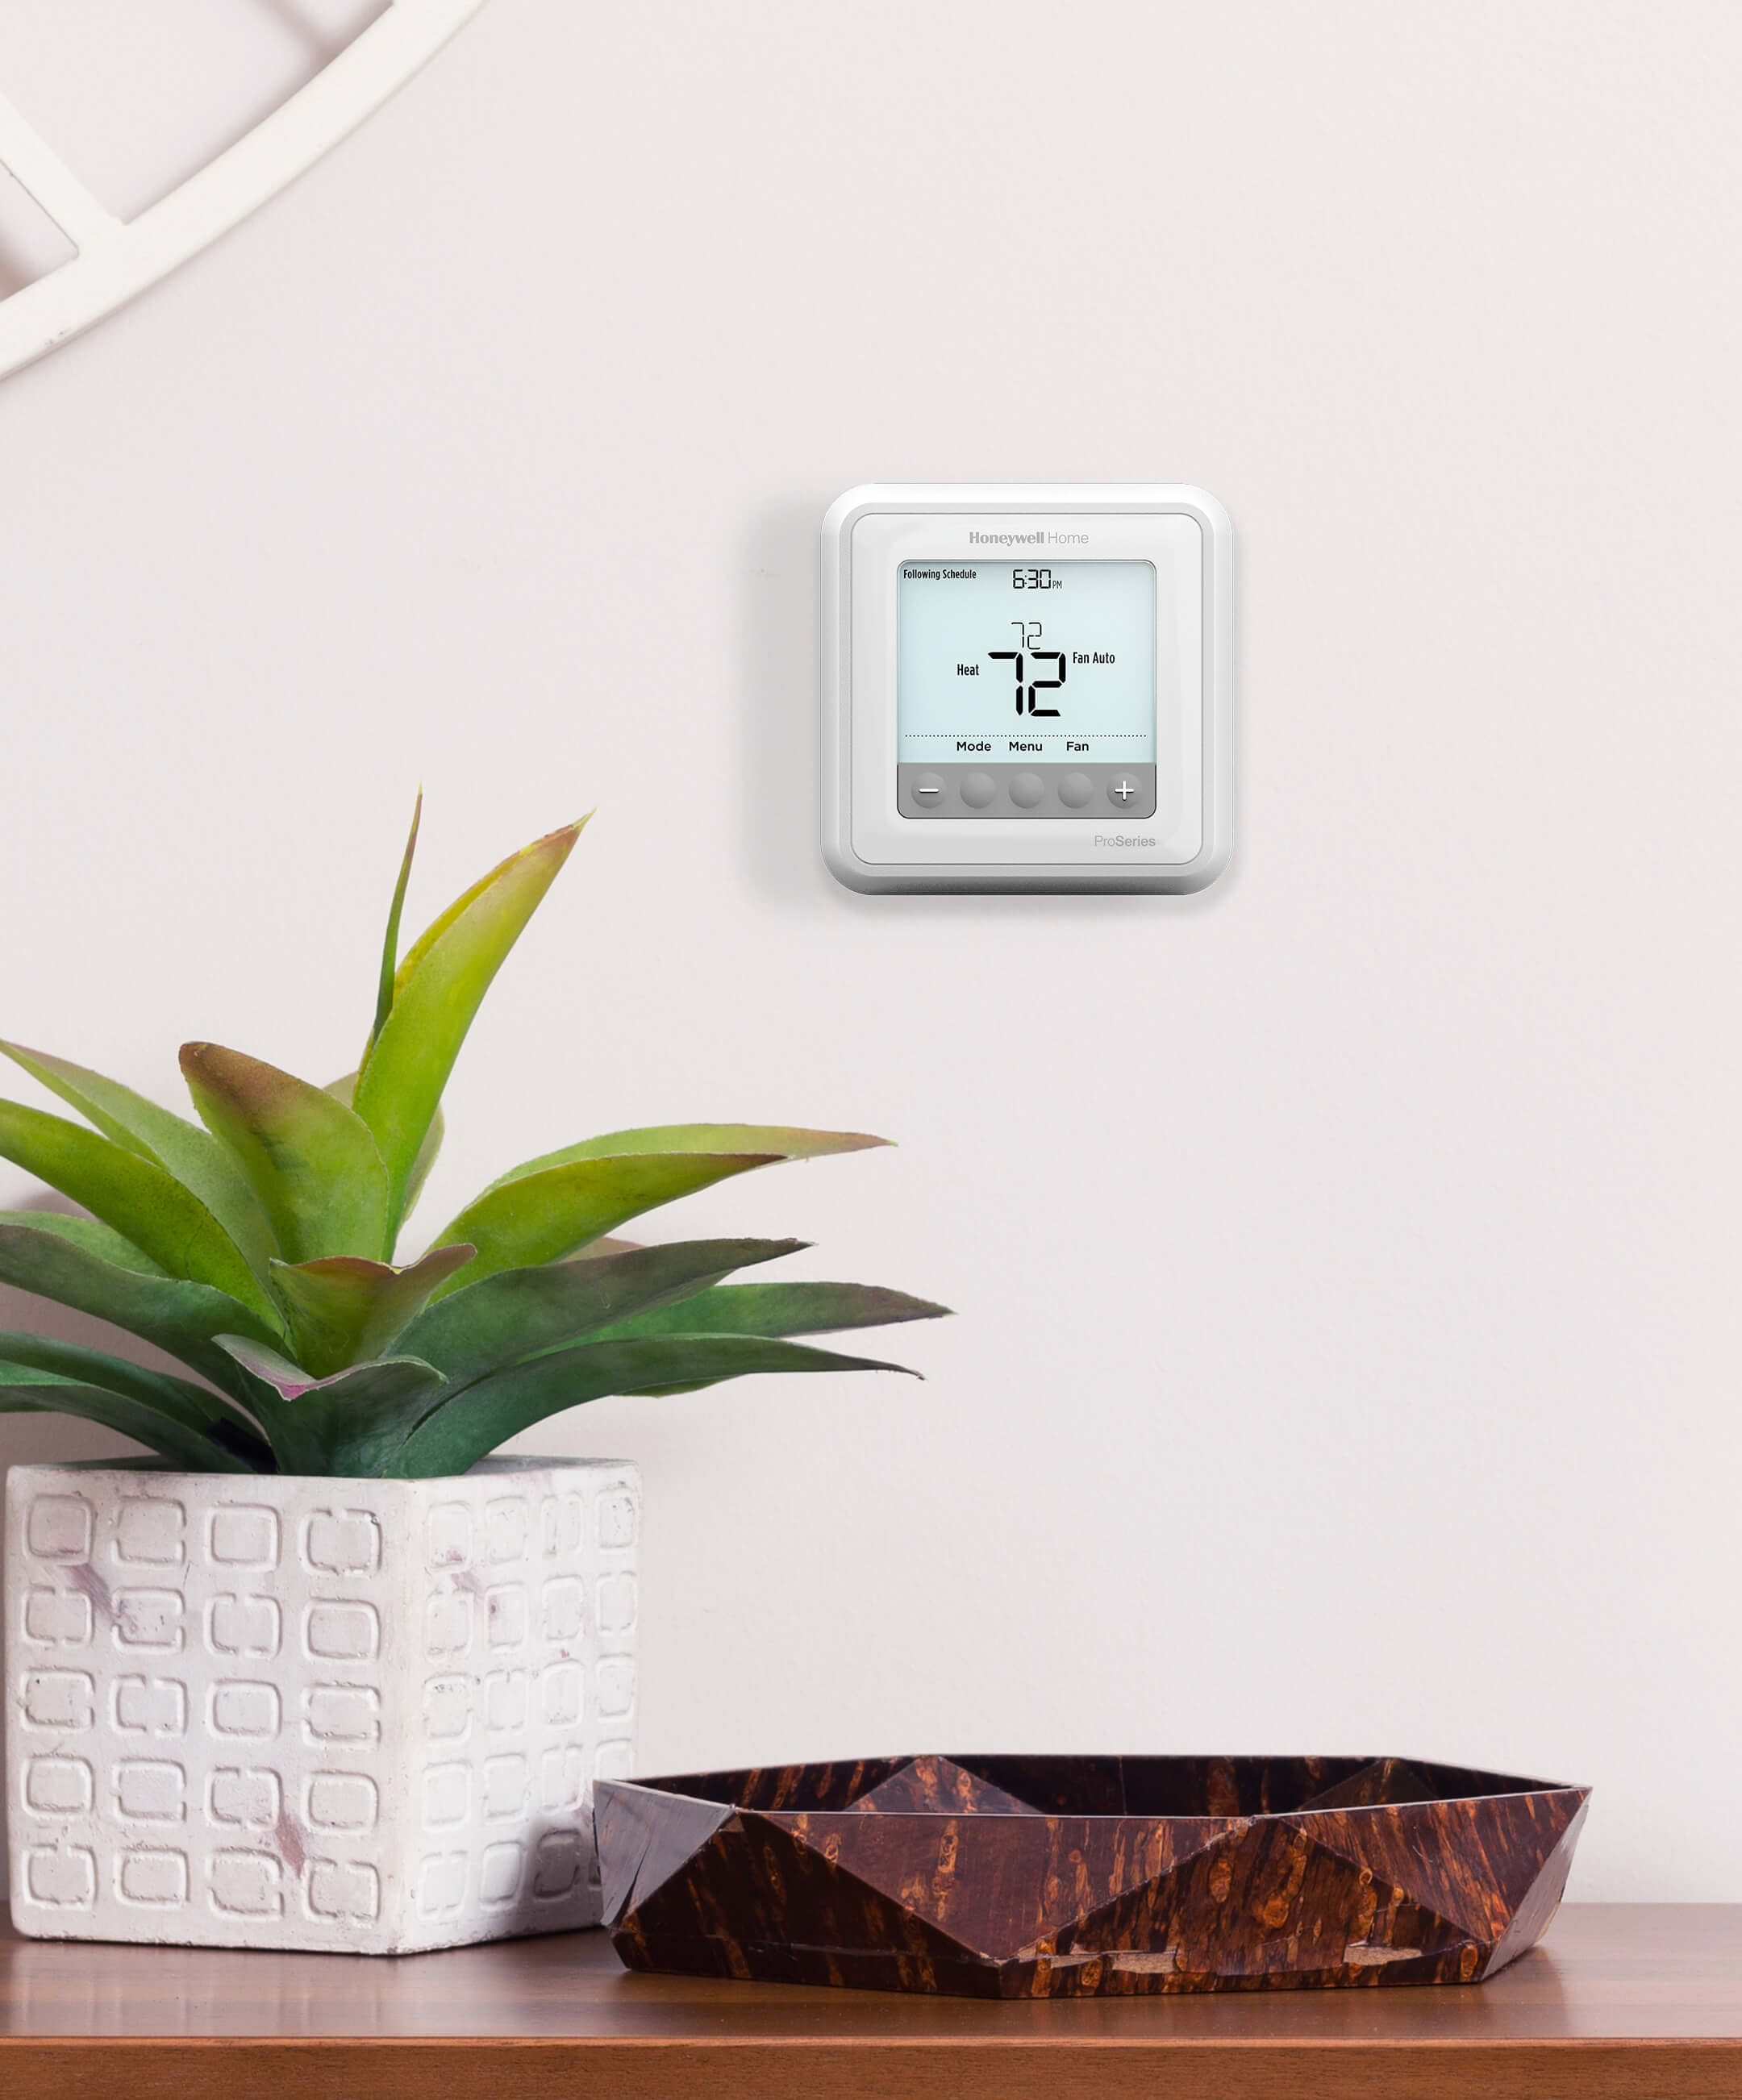 Honeywell T4 Pro Programmable/Non-Programmable Single Stage Thermostat (1  Heat/1 Cool)